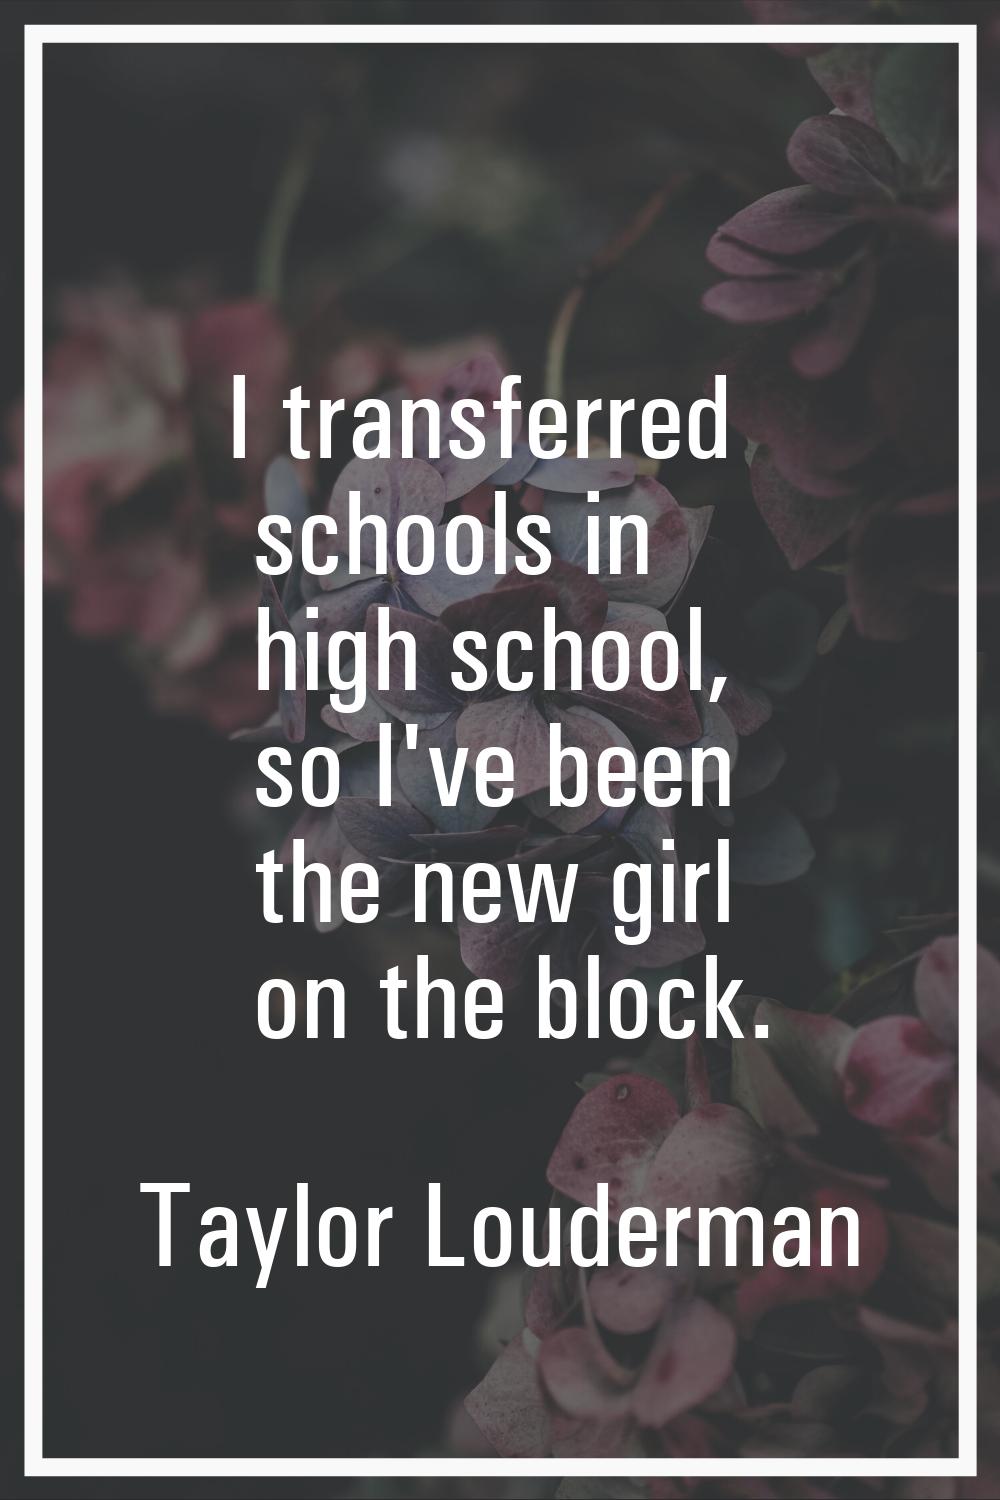 I transferred schools in high school, so I've been the new girl on the block.